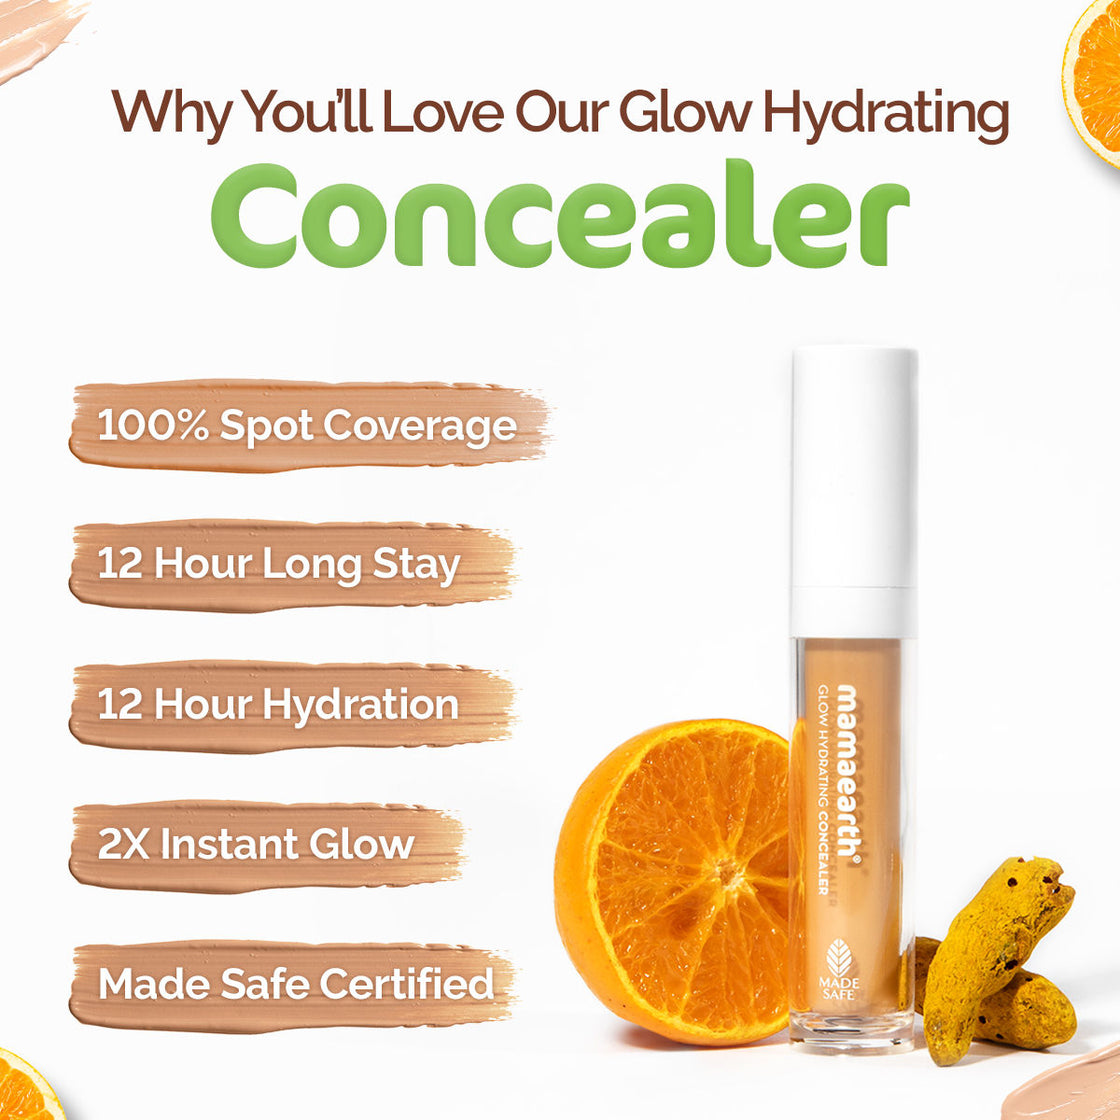 Mamaearth Glow Hydrating Concealer With Vitamin C & Turmeric For 100% Spot Coverage-6